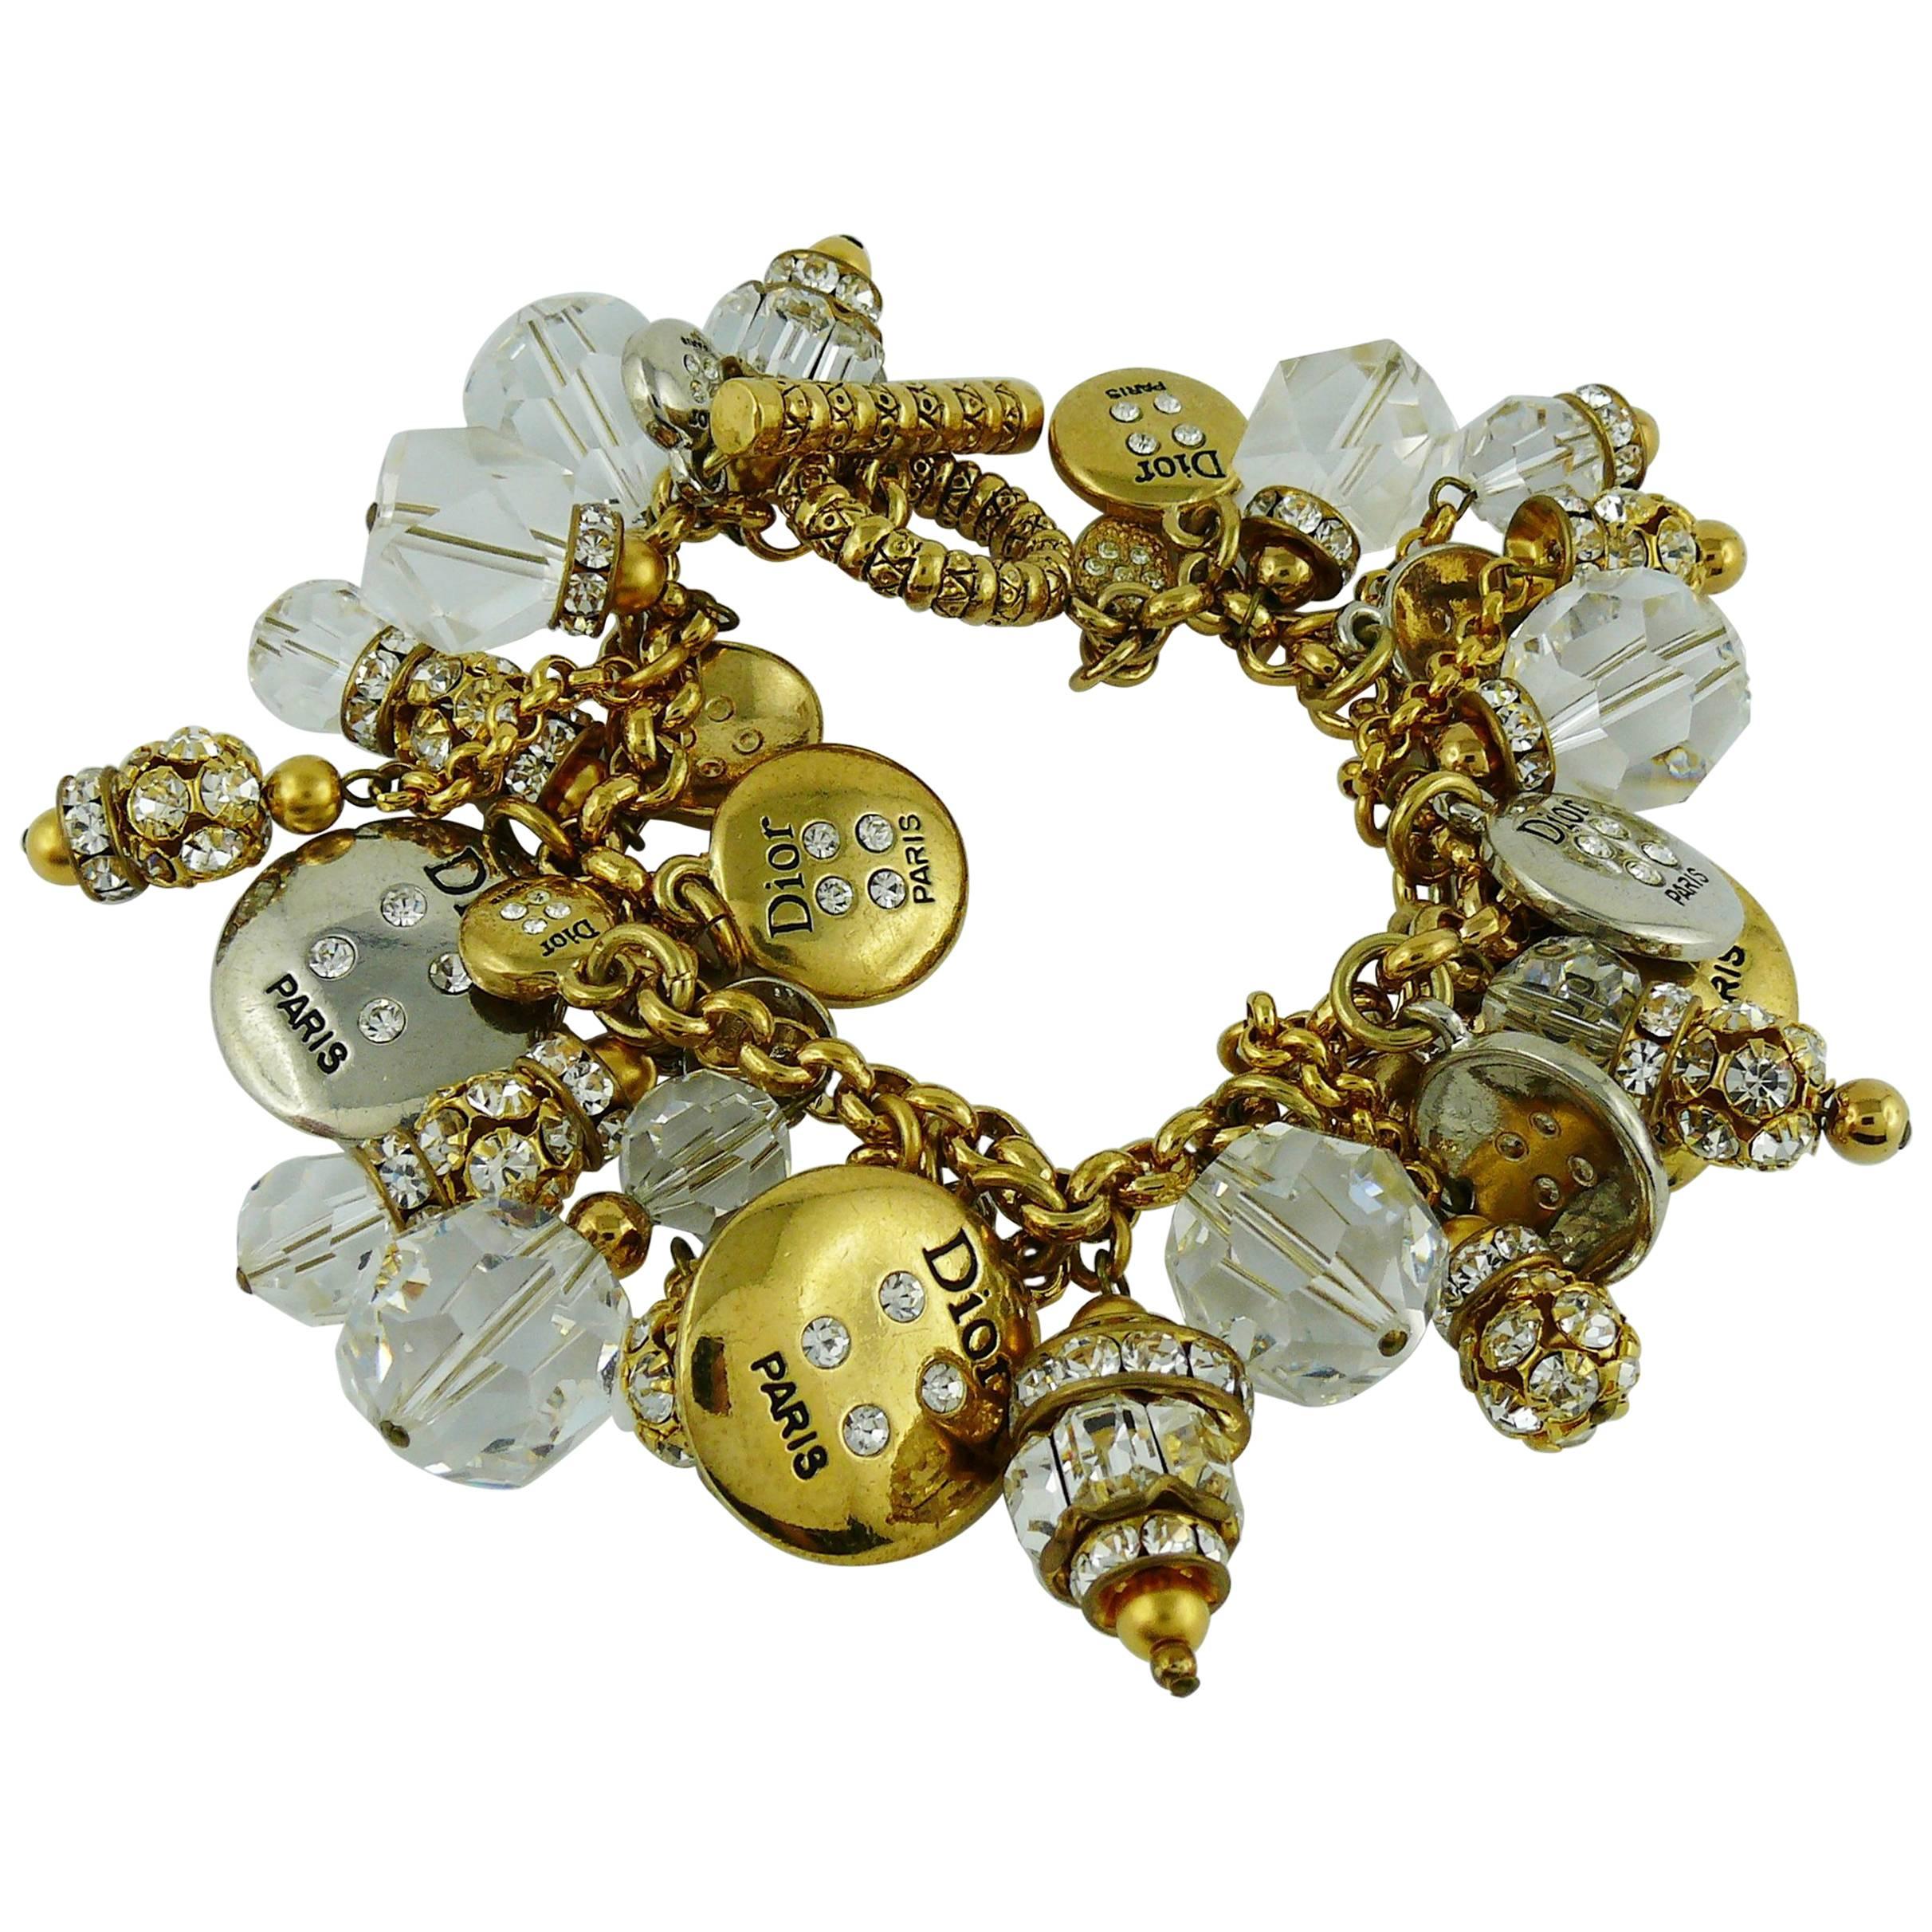 Christian Dior Boutique Vintage Iconic Buttons and Jewelled Charms Bracelet